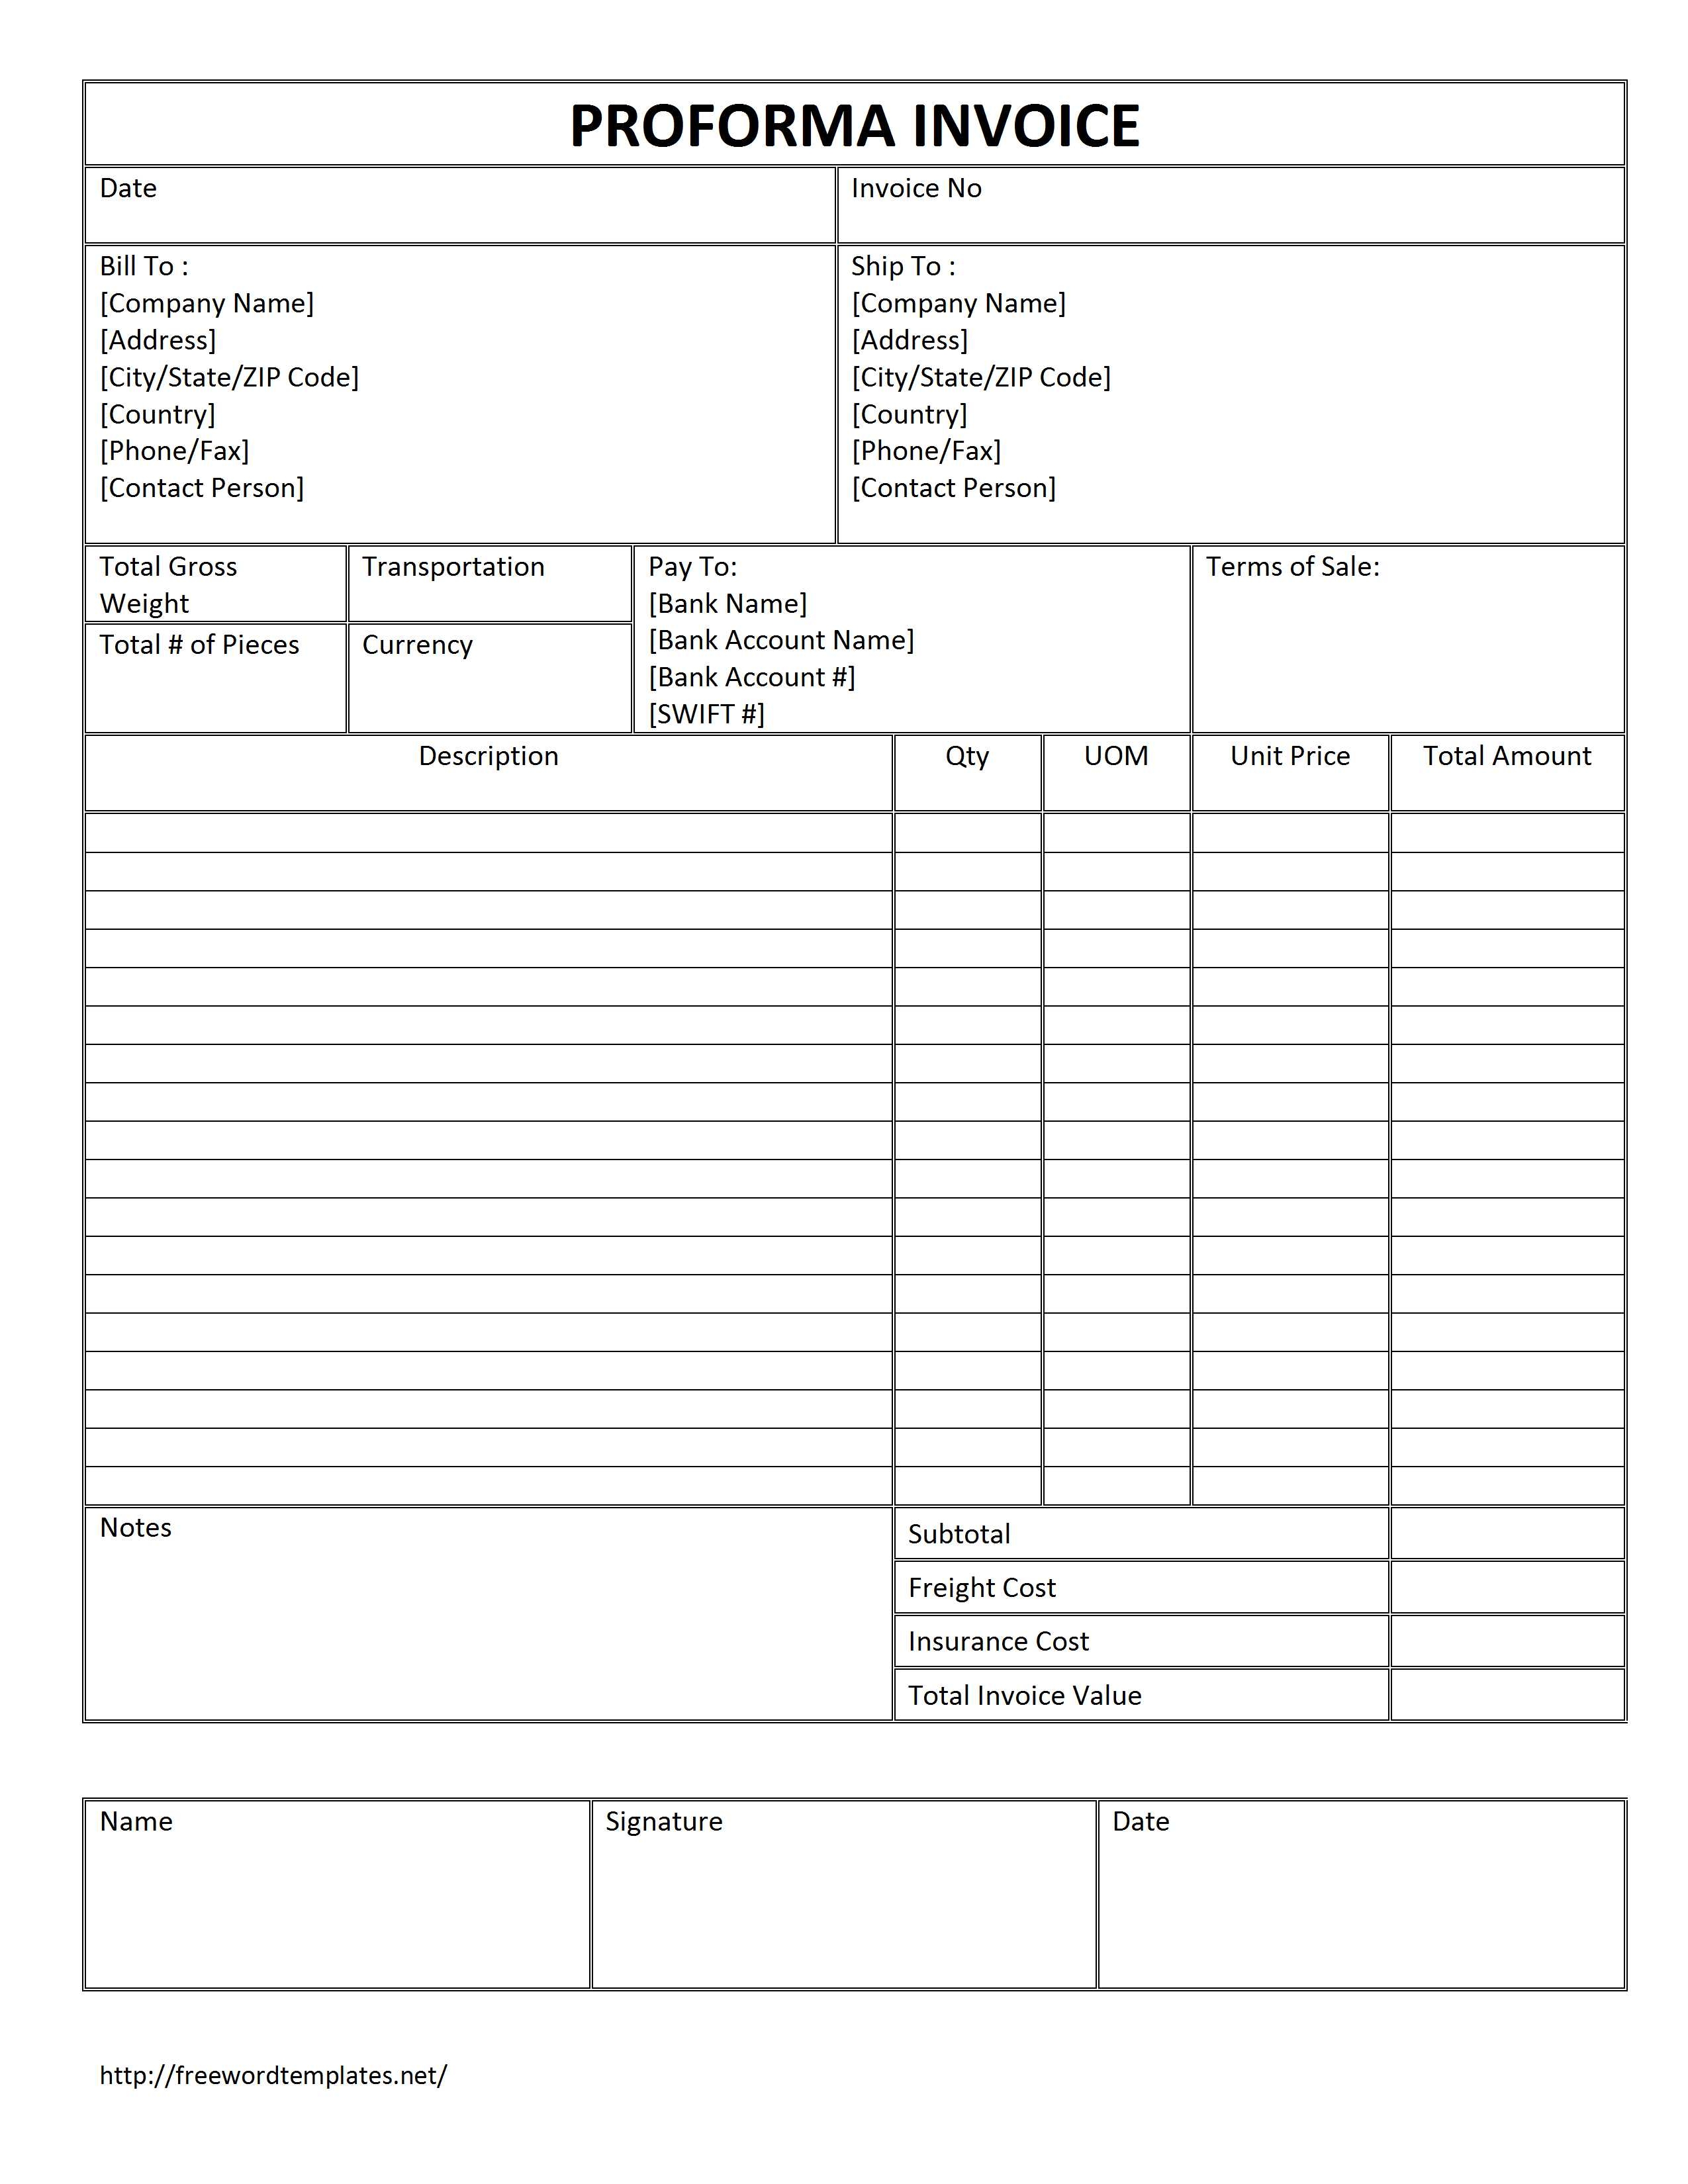 commercial invoice freewordtemplates commercial invoice word template